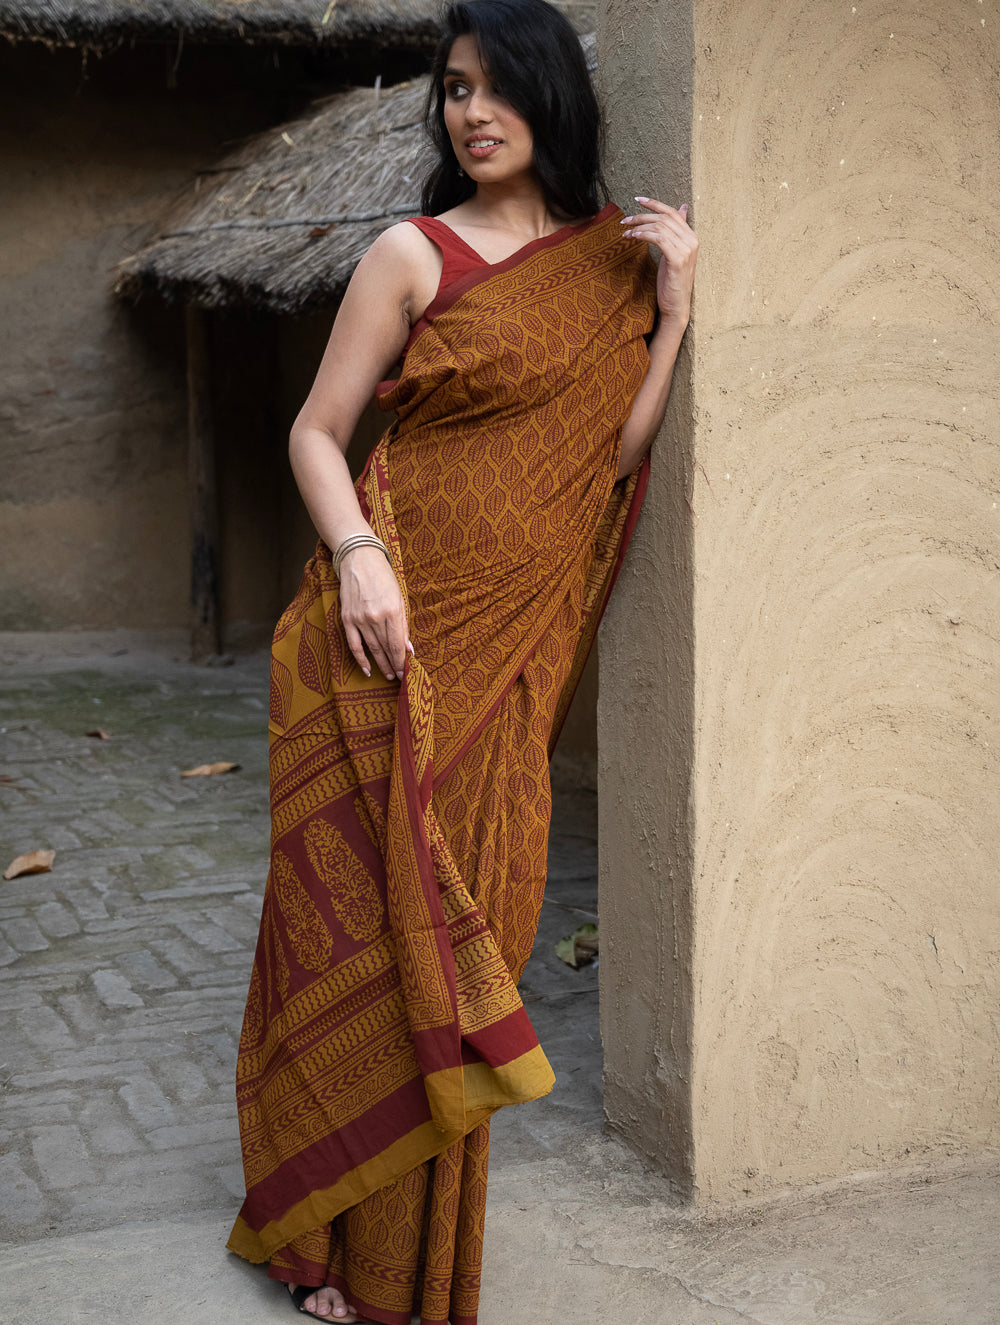 Load image into Gallery viewer, Exclusive Bagh Hand Block Printed Cotton Saree - Ornate Leaf